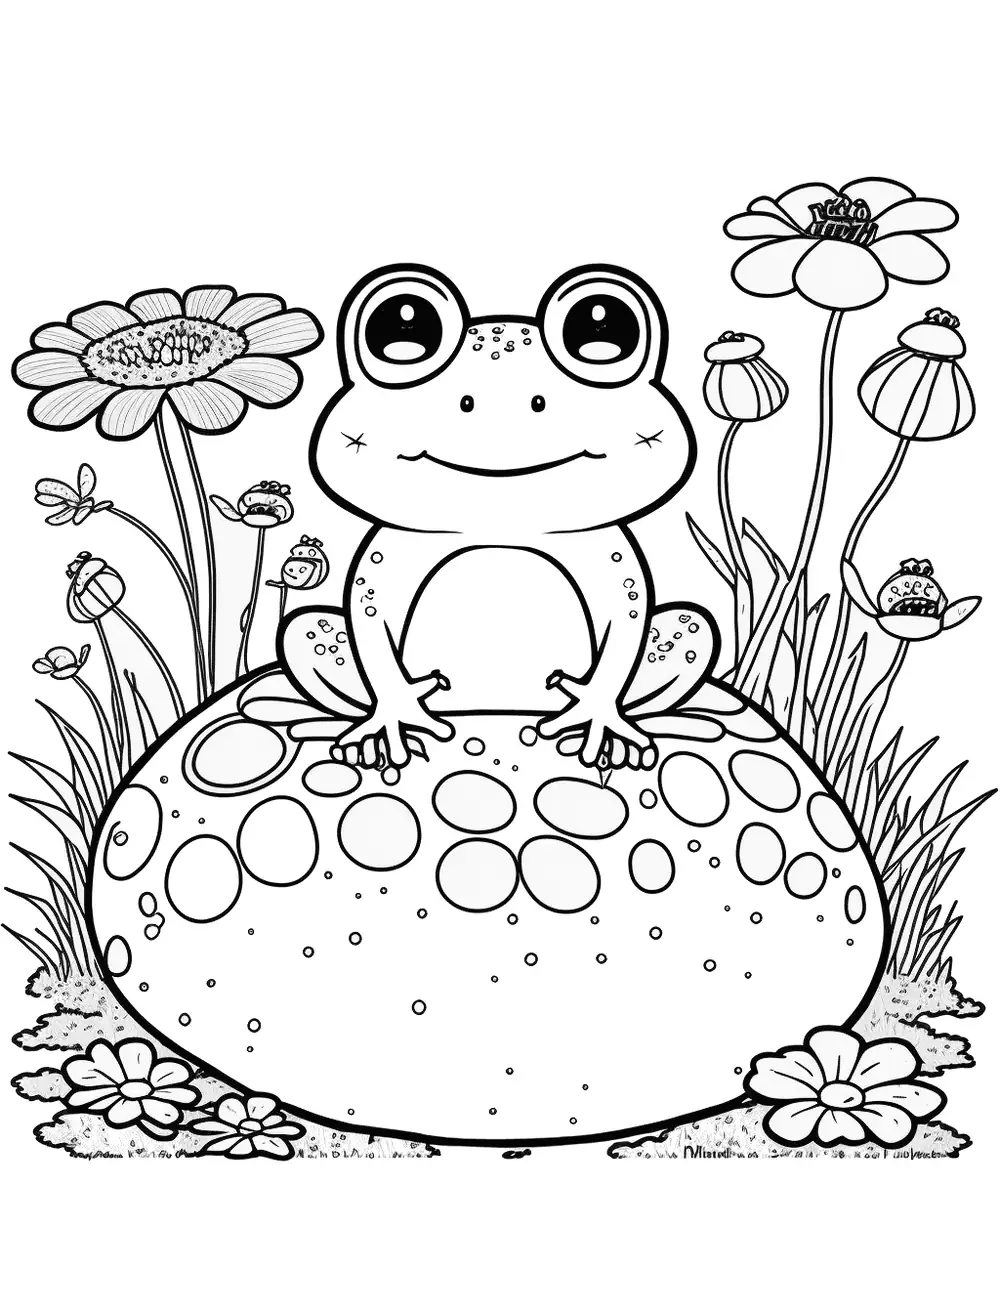 Toad In A Mushroom Coloring Page - A toad sitting on a mushroom, surrounded by flowers and insects